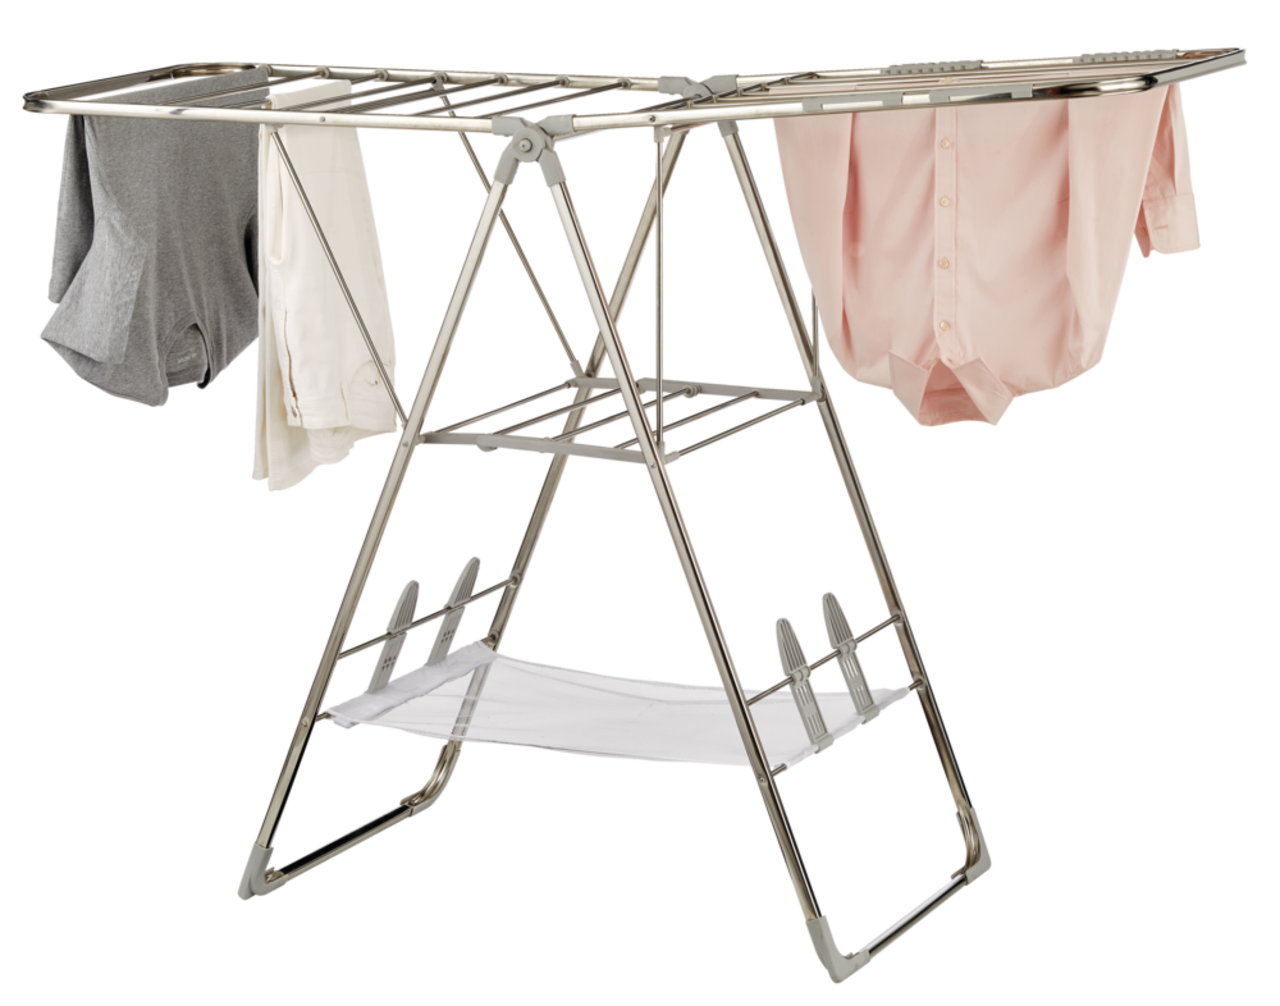 HYNAWIN Clothes Drying Racks, Upgraded Stainless Steel Laundry Drying Rack, Heavy  Duty Collapsible Clothes Storage Rack